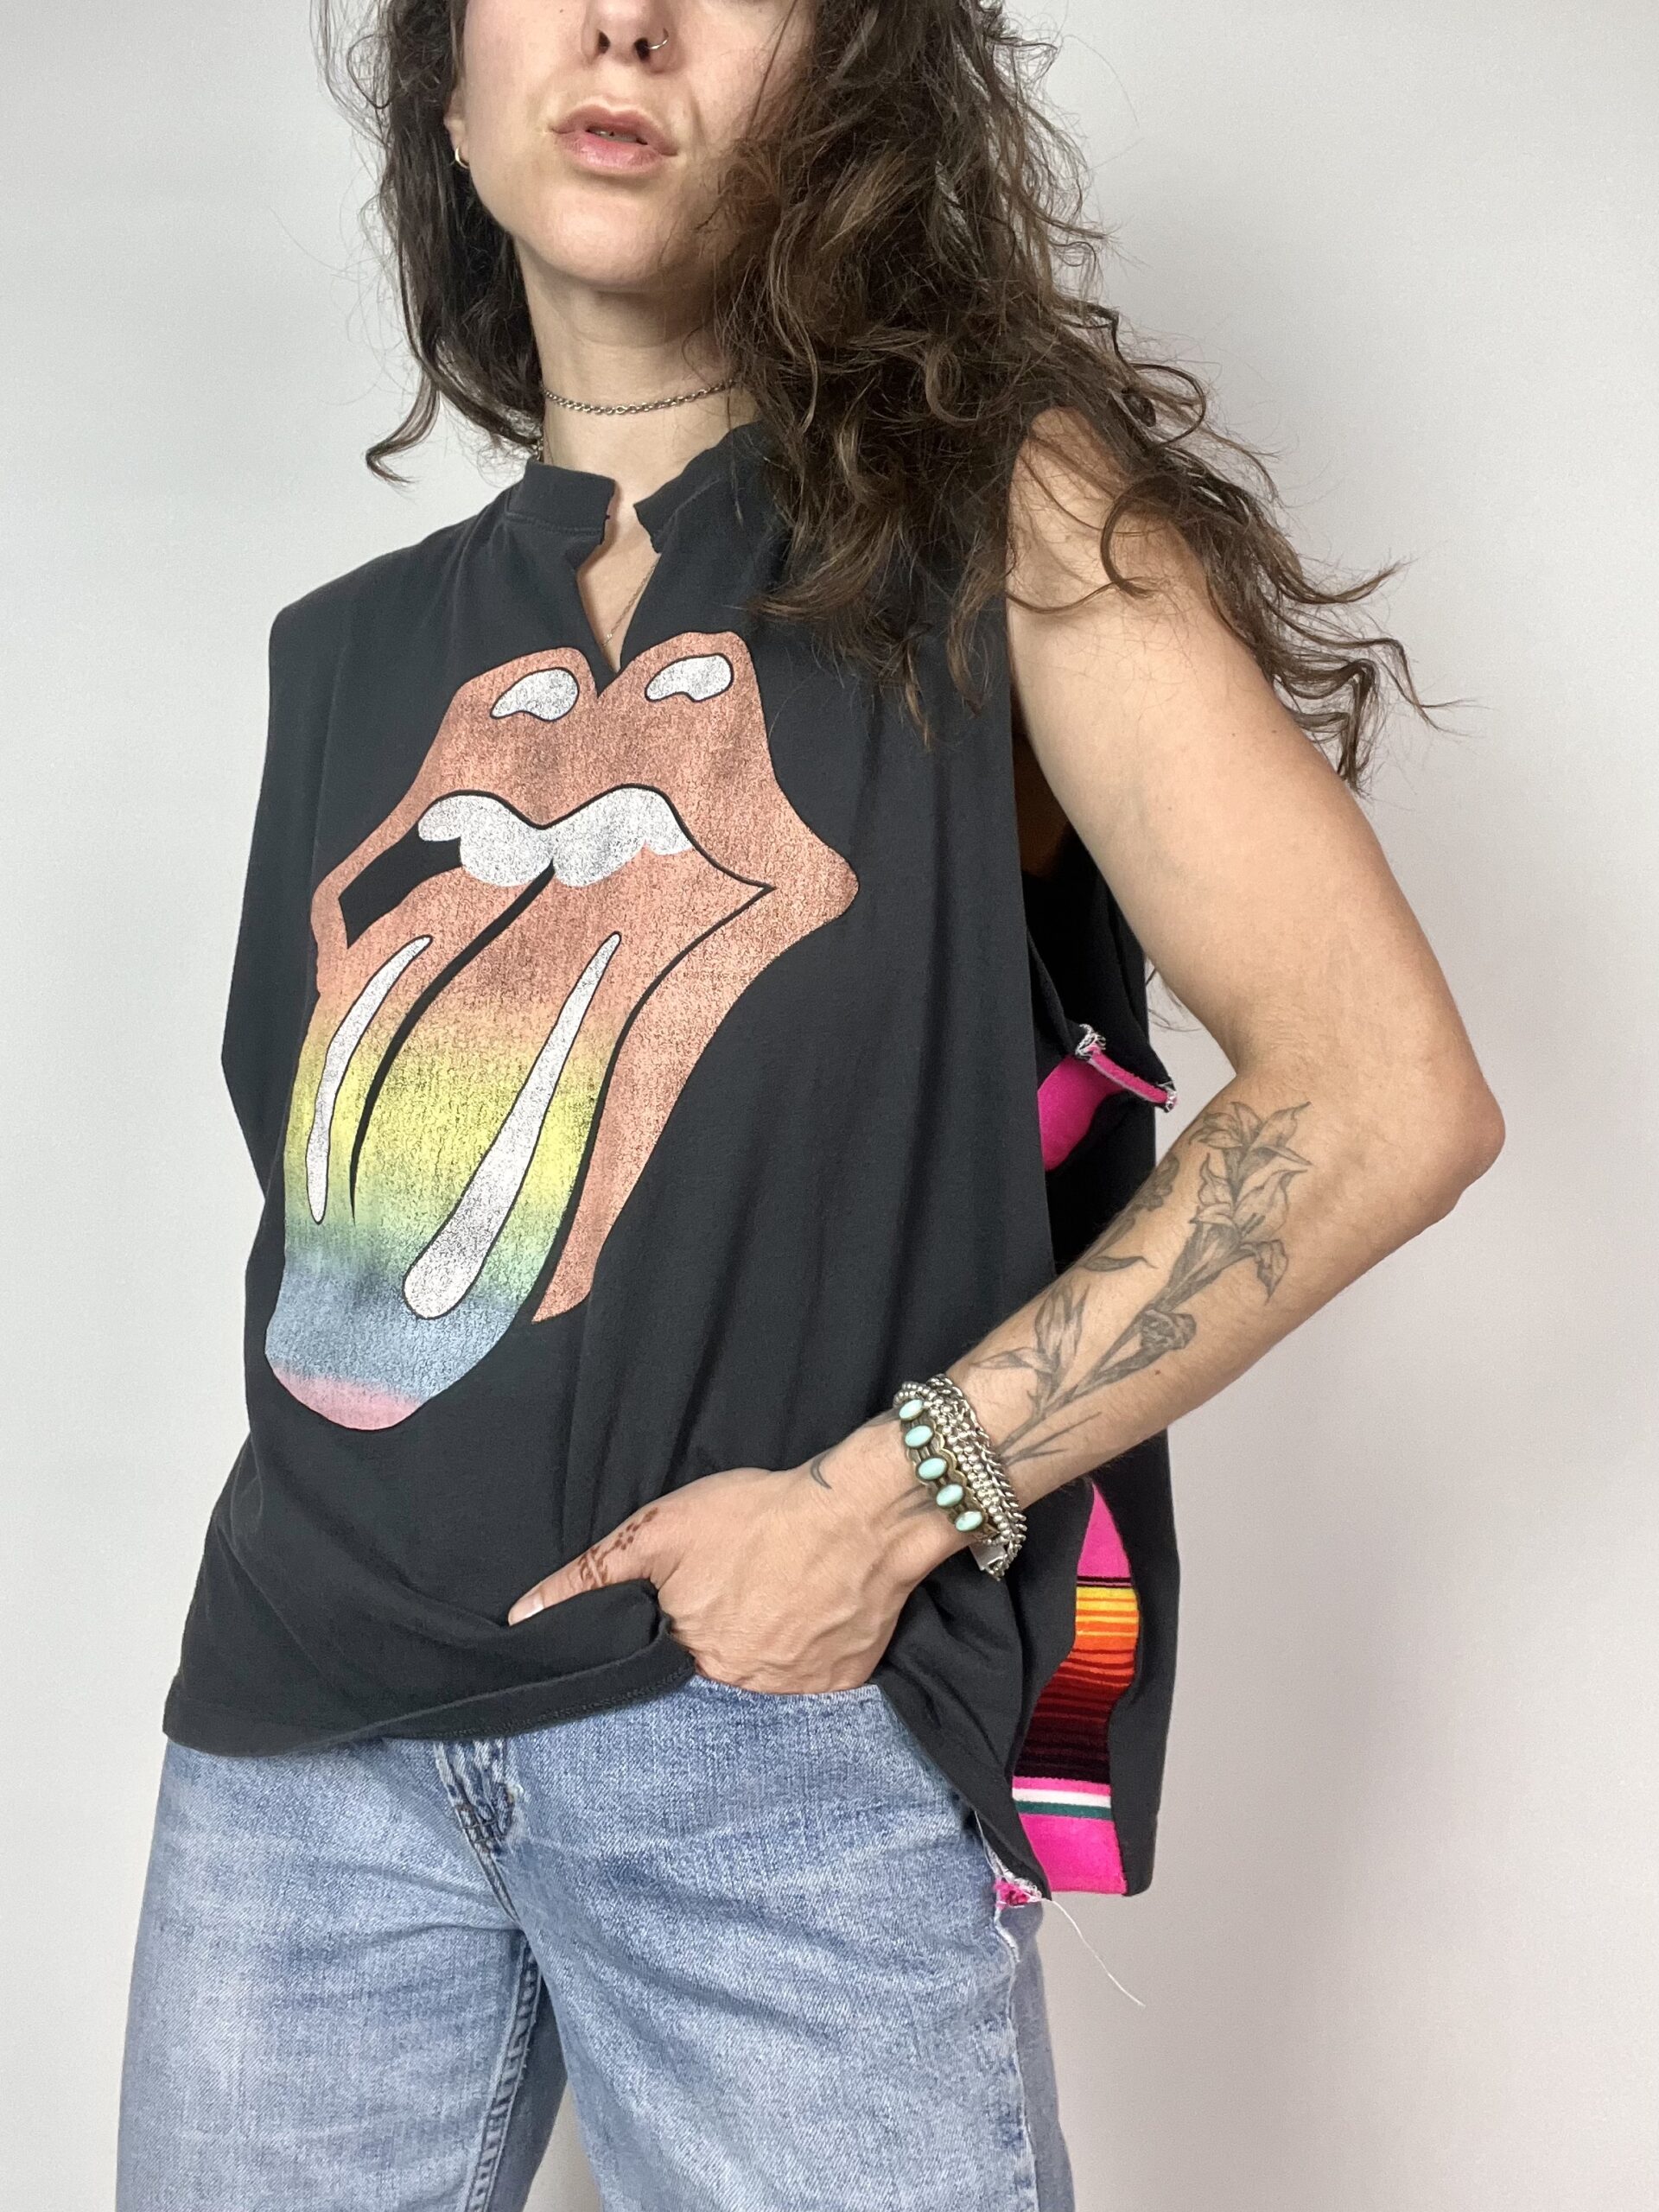 a woman with long hair wearing a black shirt with the rolling stones on it.